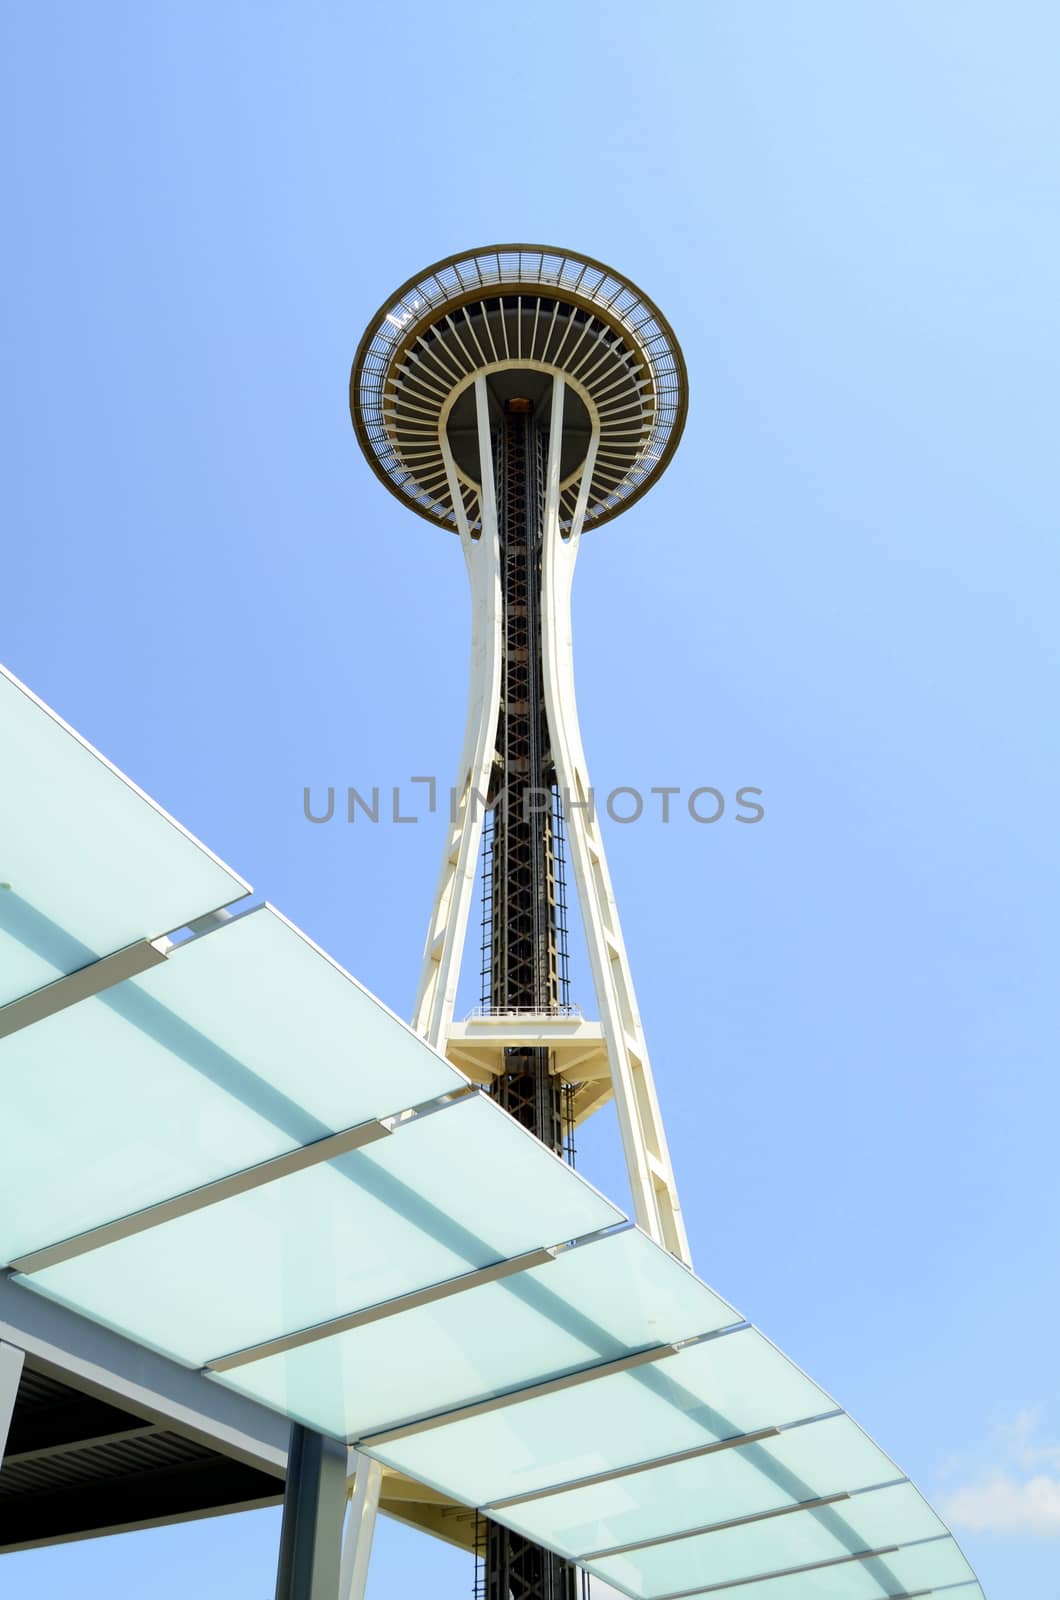 The Space Needle Tower In Seattle Washington USA